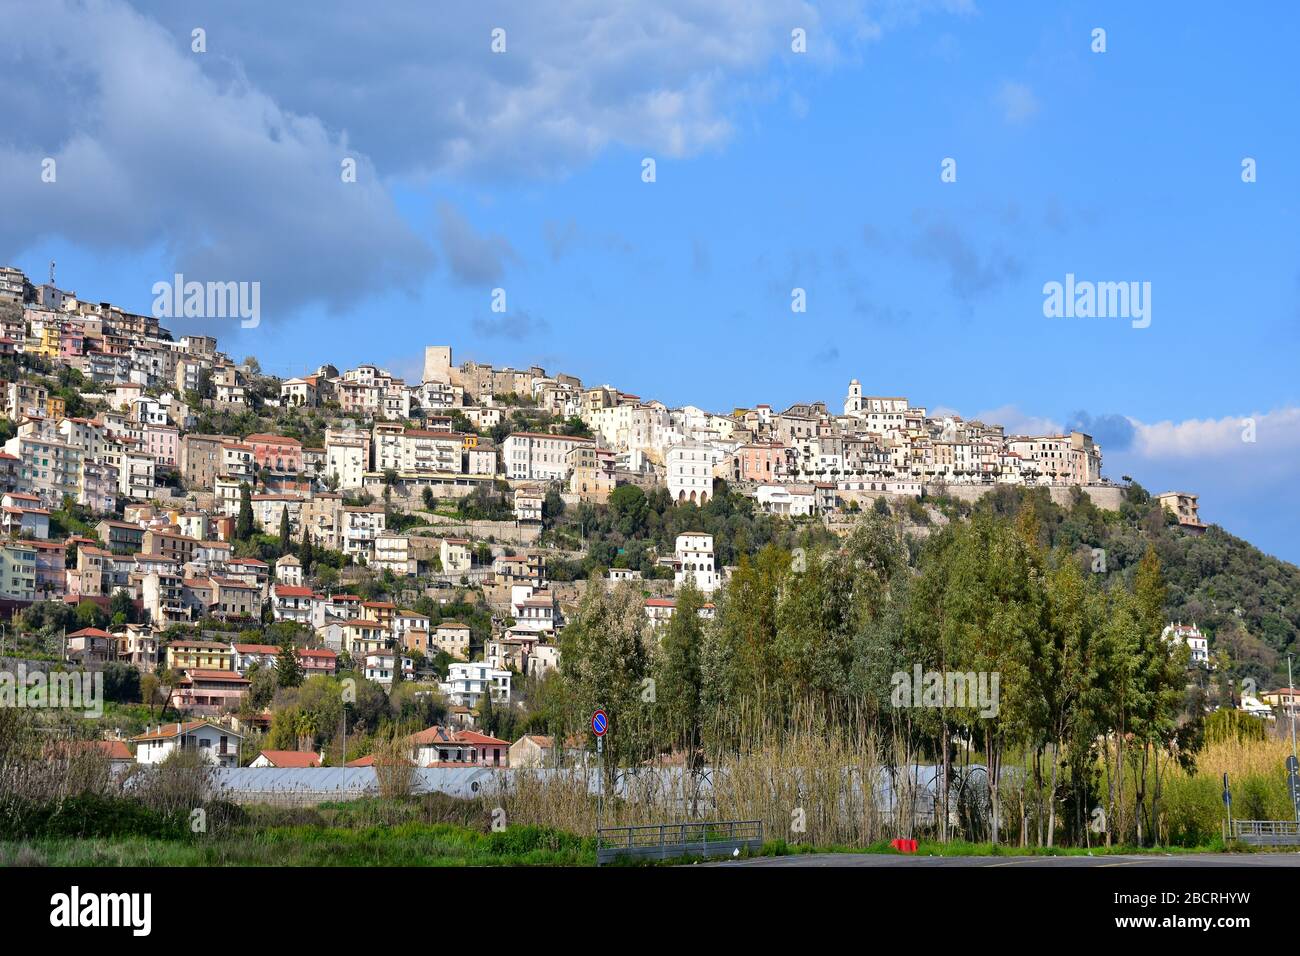 Panoramic view of Monte San Biagio, a small village in central Italy Stock Photo